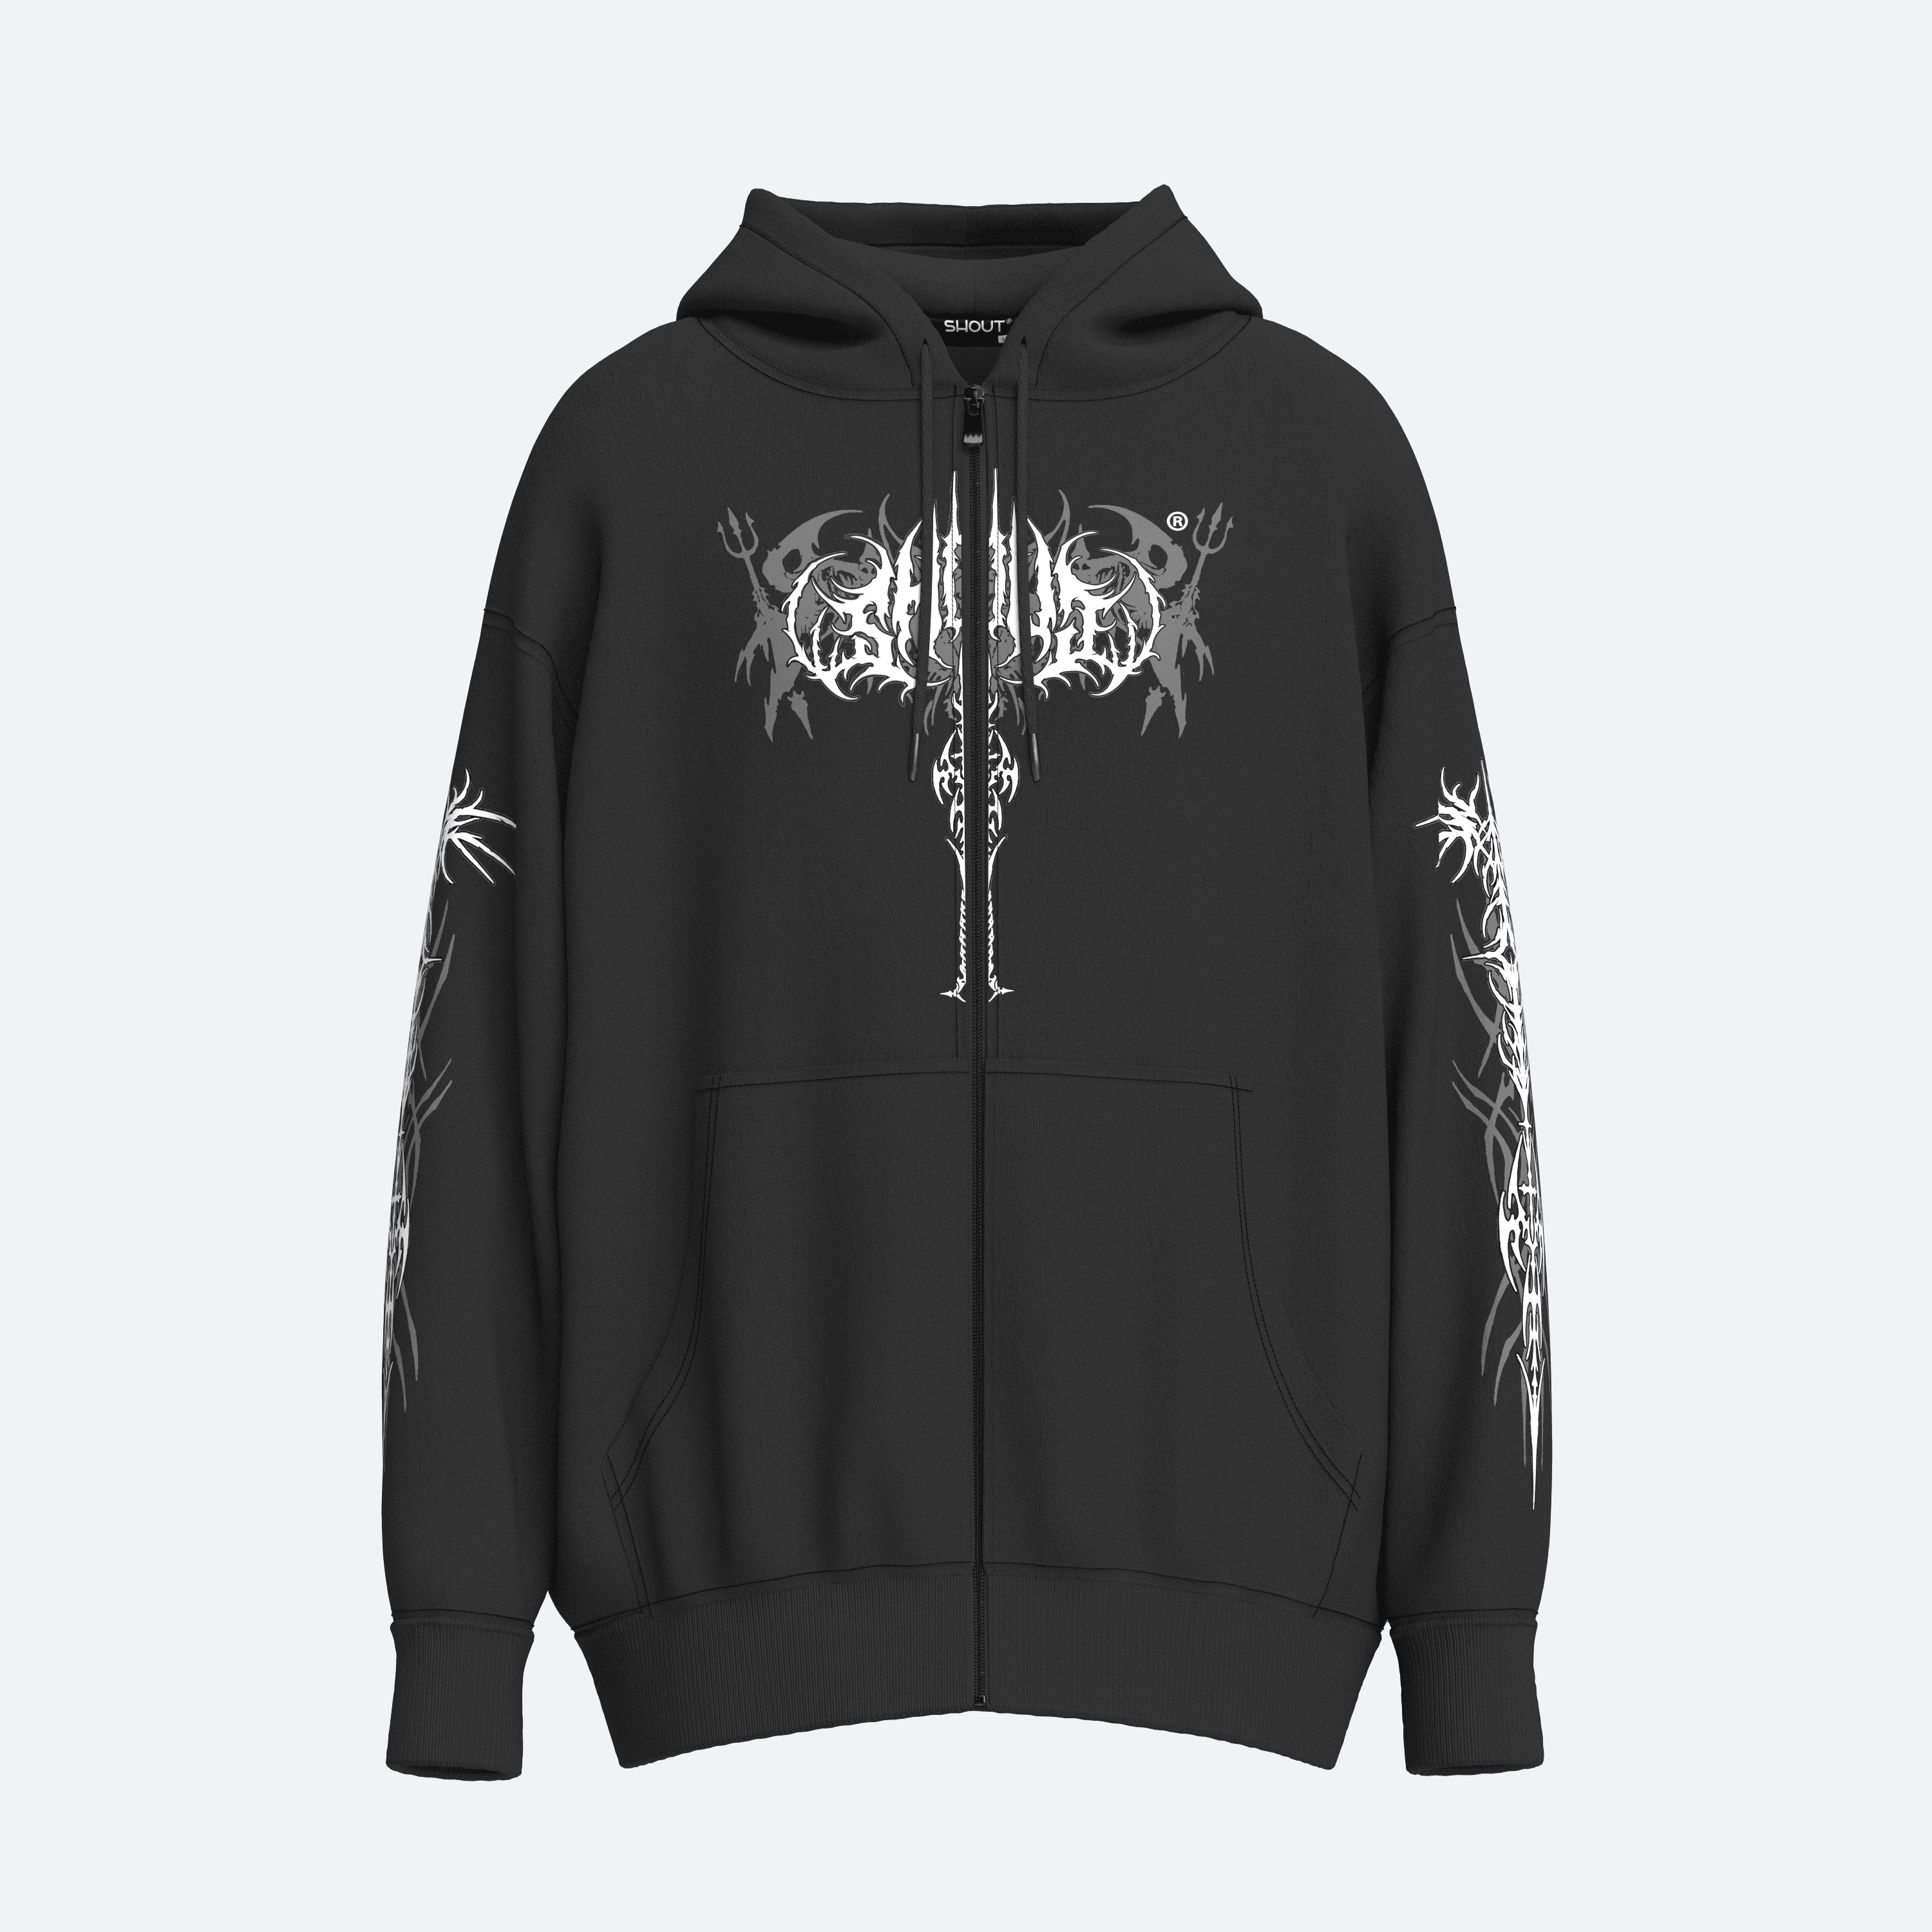 Oversize Shout Limited Edition Brutal Unisex Zip Up Hoodie